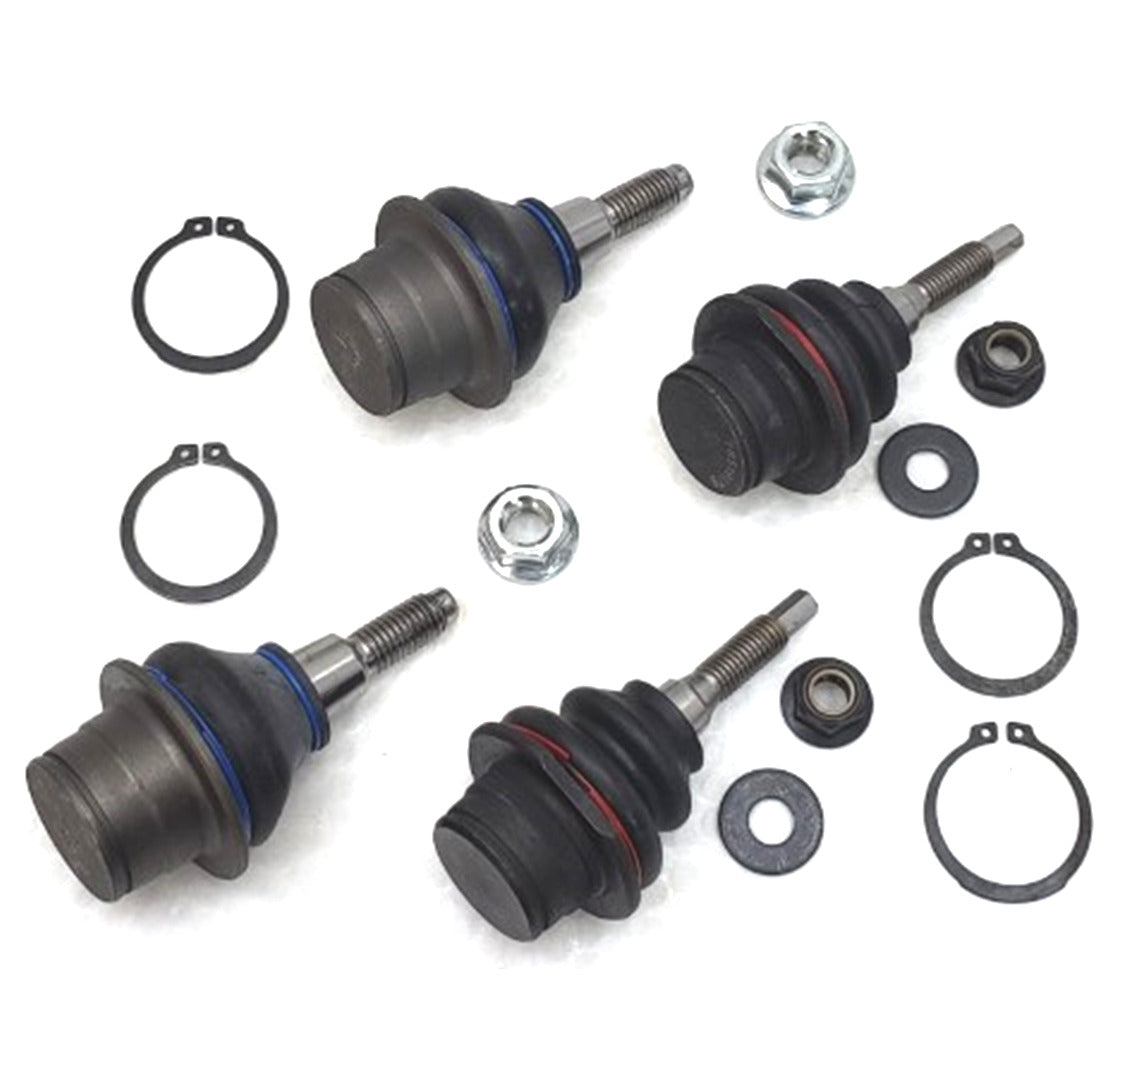 XRF Ball Joints Upper Lower Steering Suspension Kit for 2015-2020 Ford F150 4x4